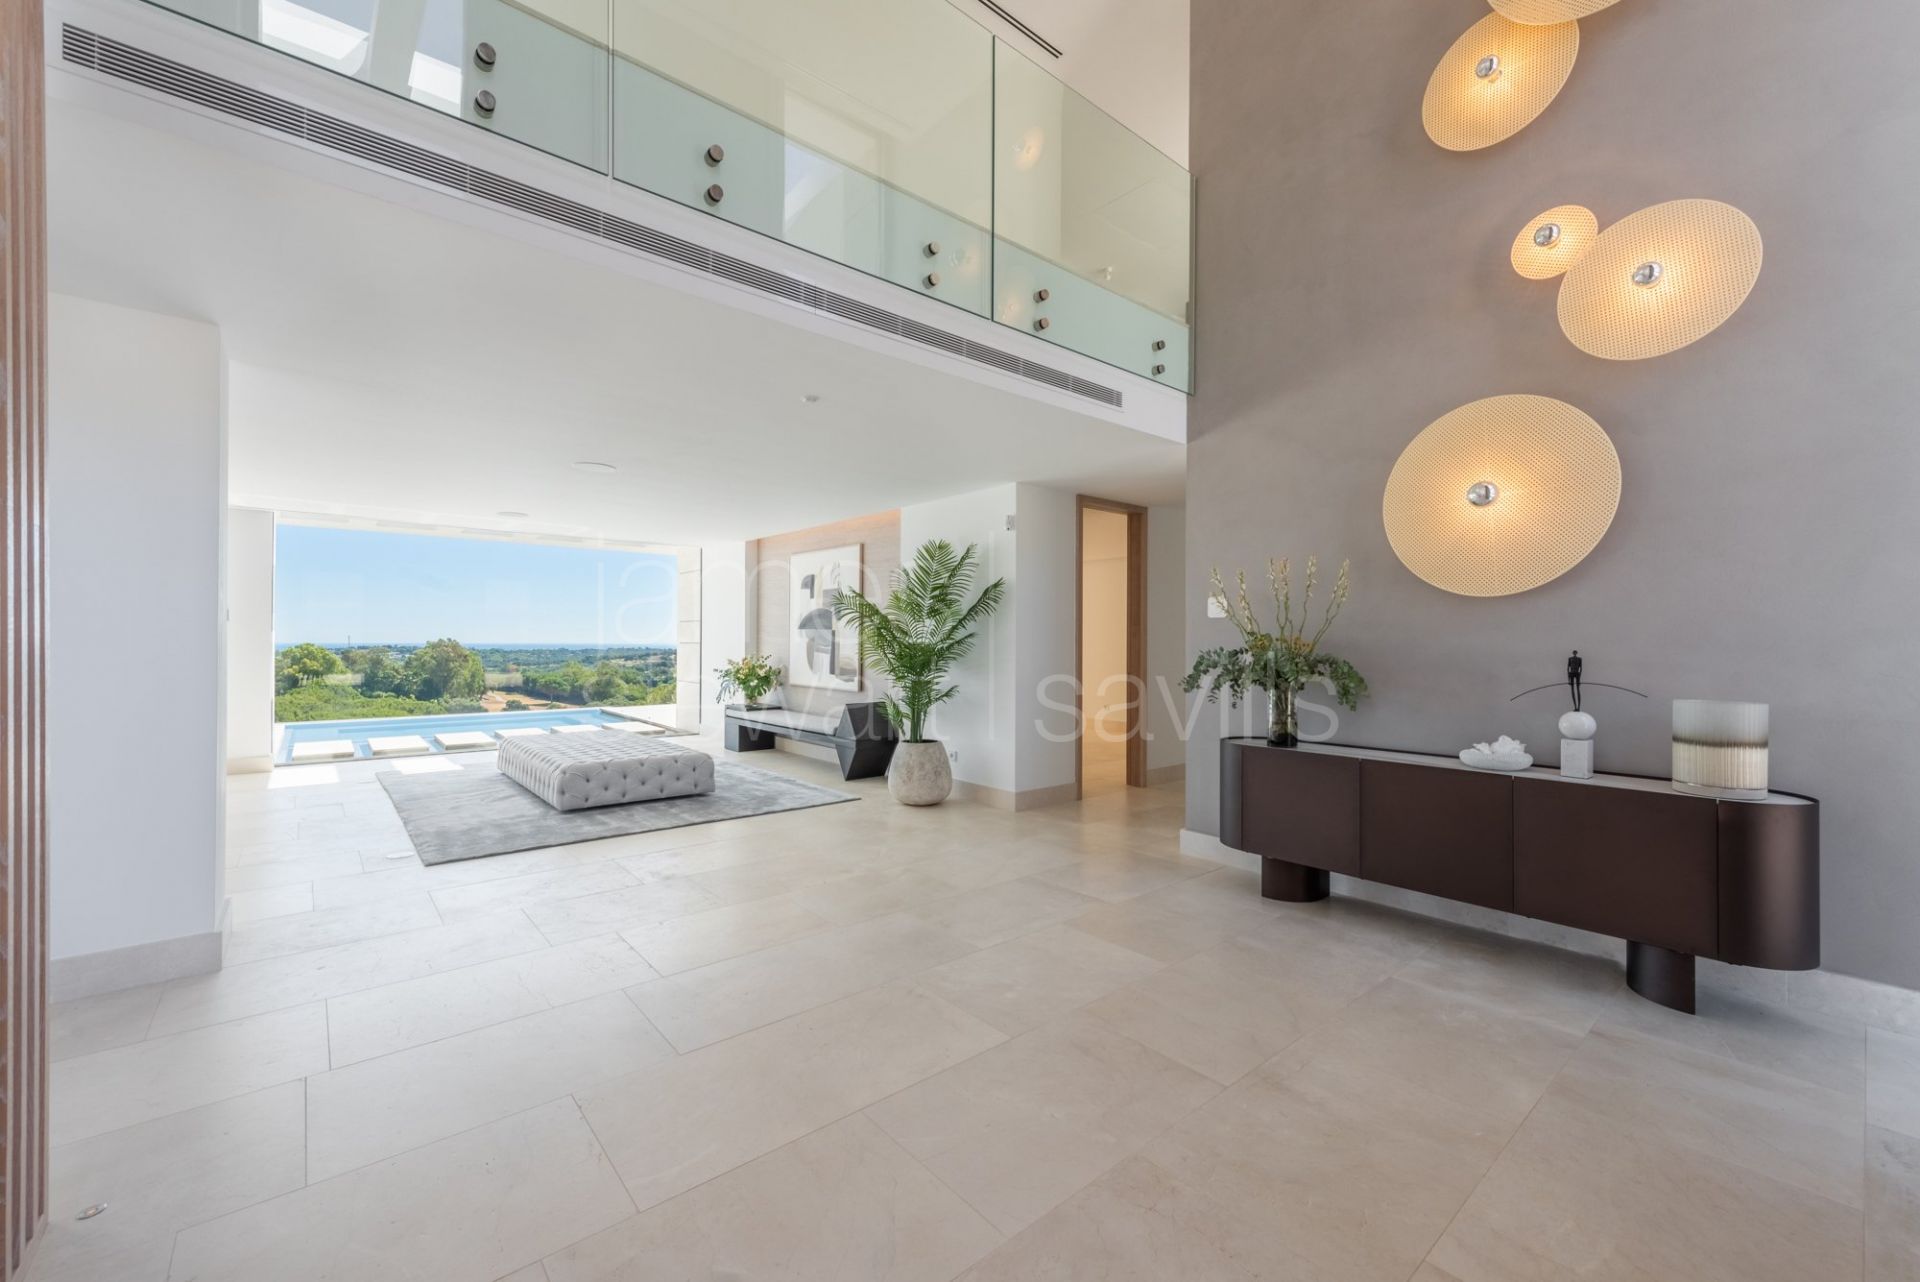 WHITE is an absolutely stunning property and one of the truly great houses of Sotogrande.